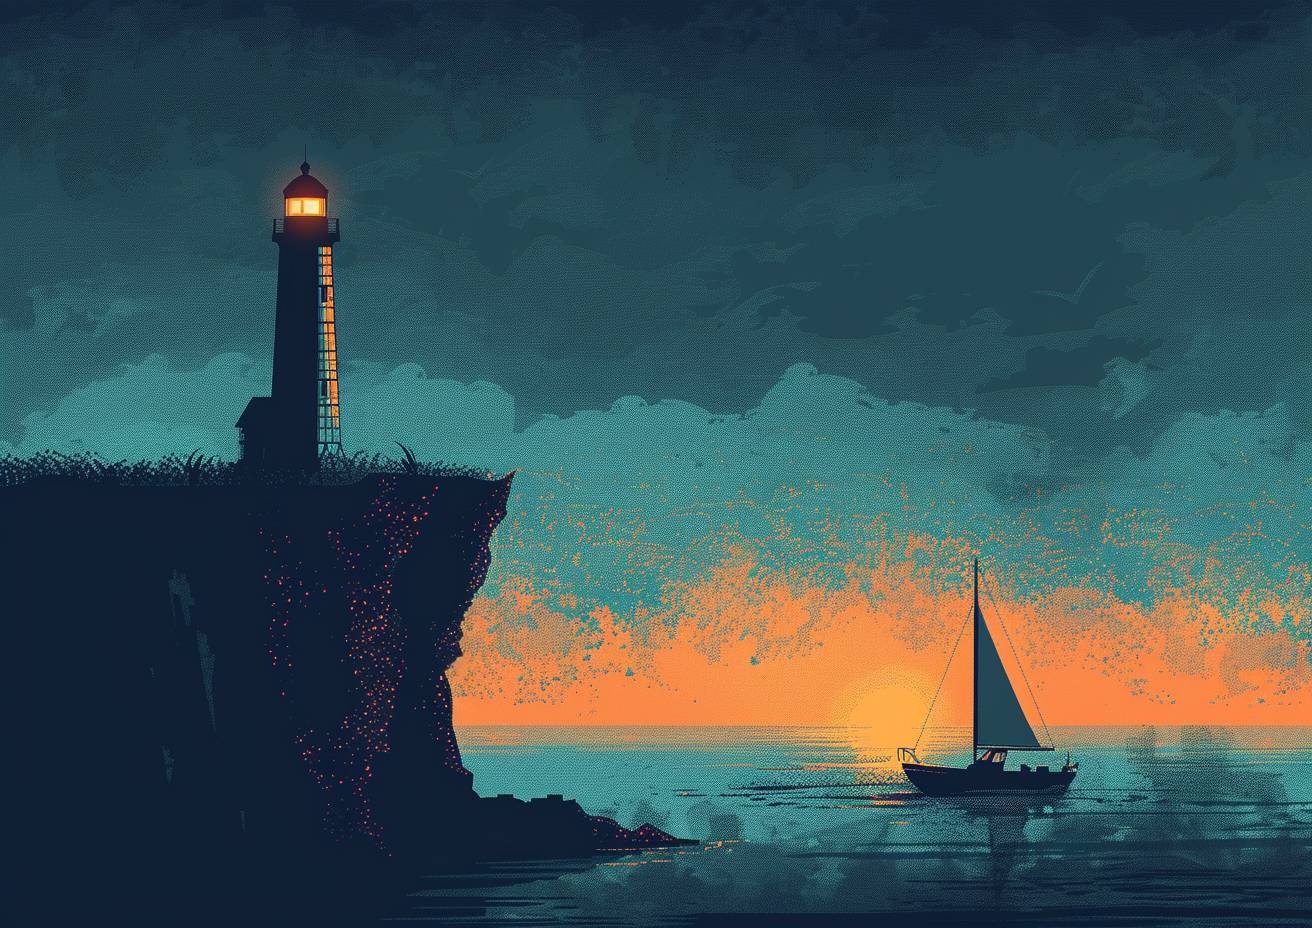 A vector illustration on a blank canvas, using teal and copper phosphor dots of varying sizes, forming a lighthouse perched on a cliff, eponymous sailboat, negative space